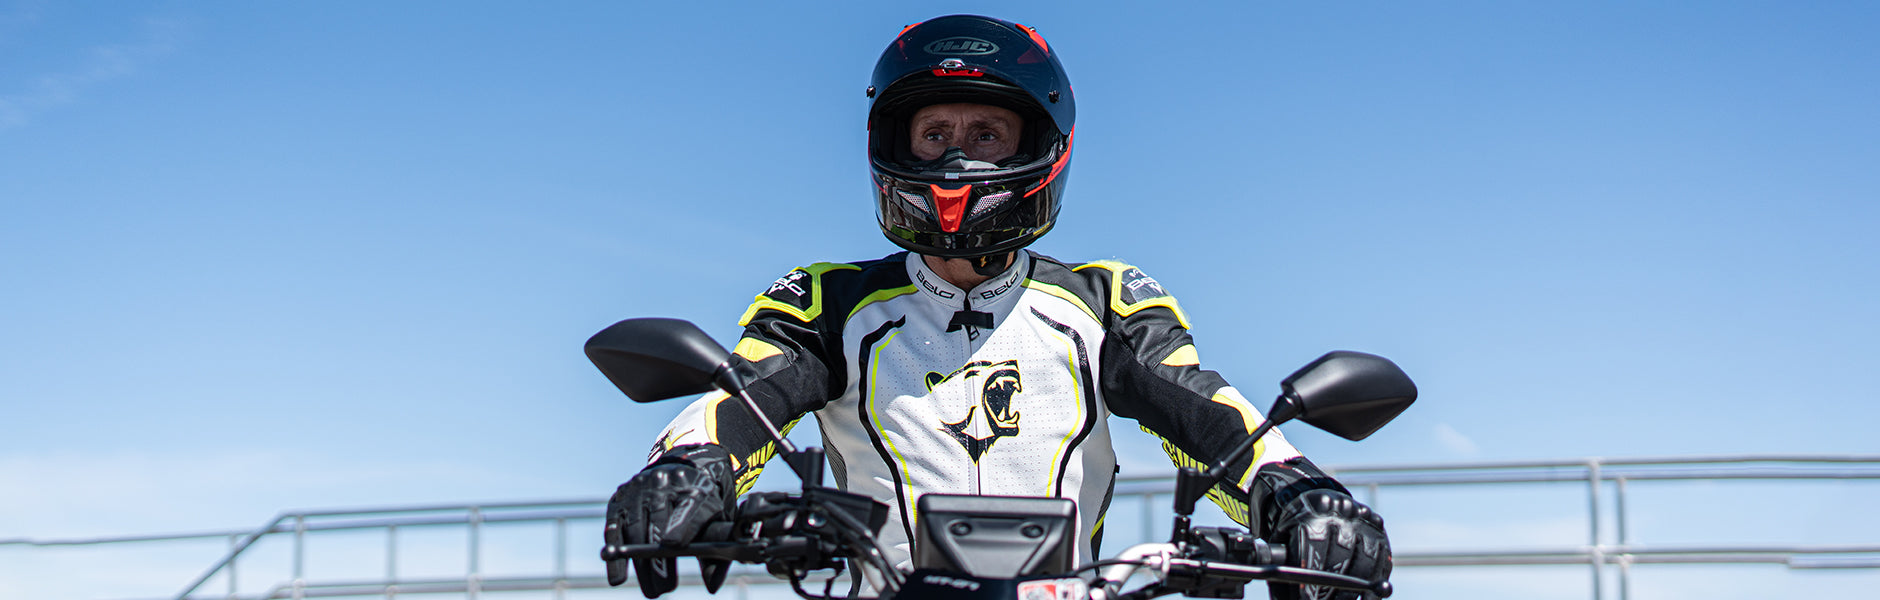 Outfitted bela motorcycle suit while riding on a race track